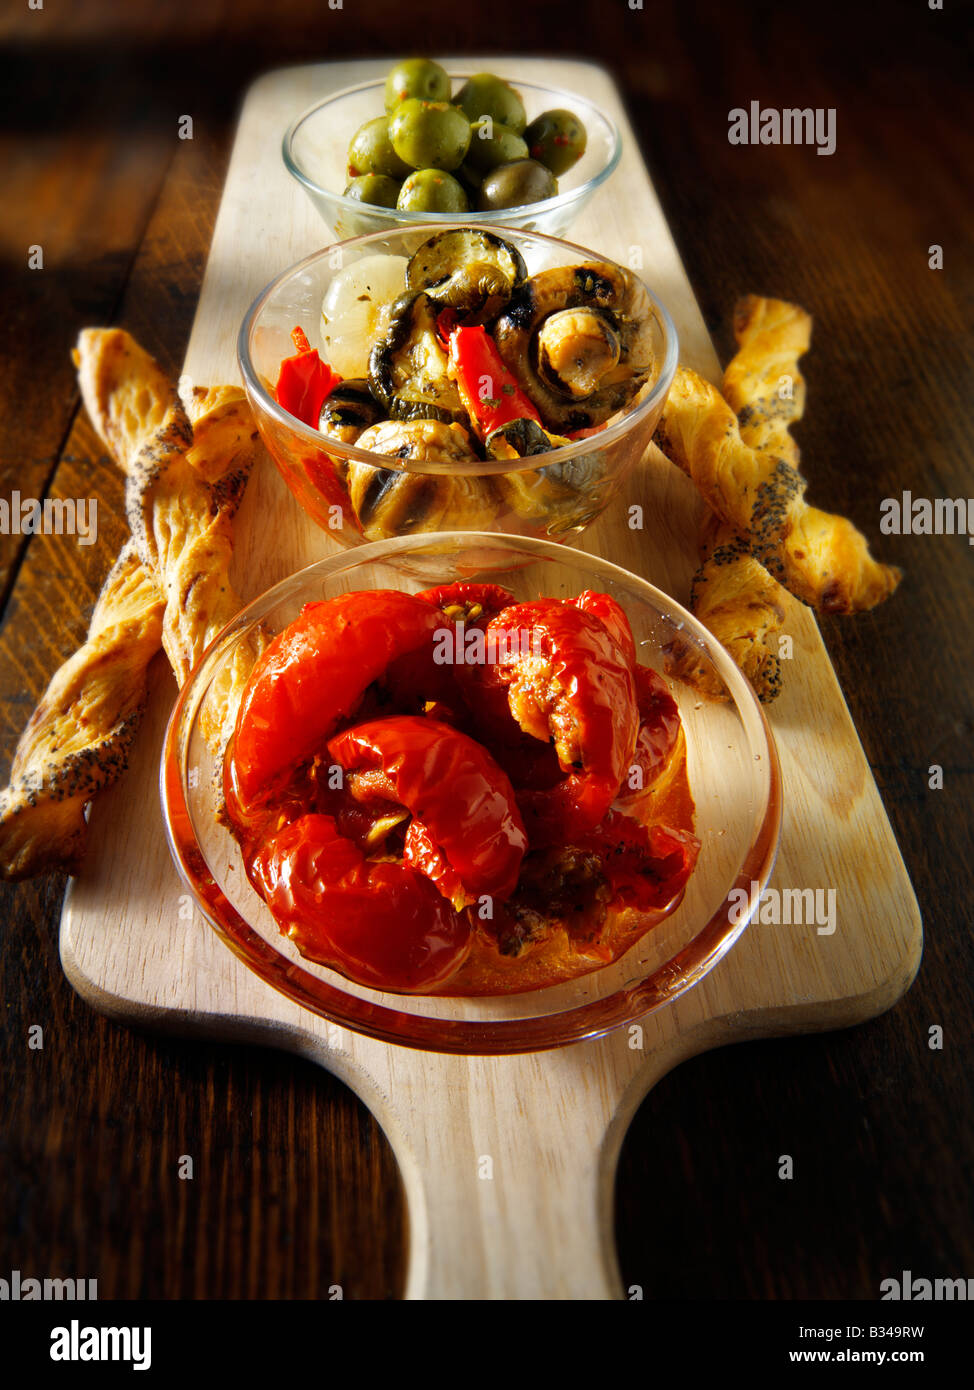 Antipasti - sun blushed tomatoes, mushroom and roast vegetables and olives with bread sticks. Stock Photo